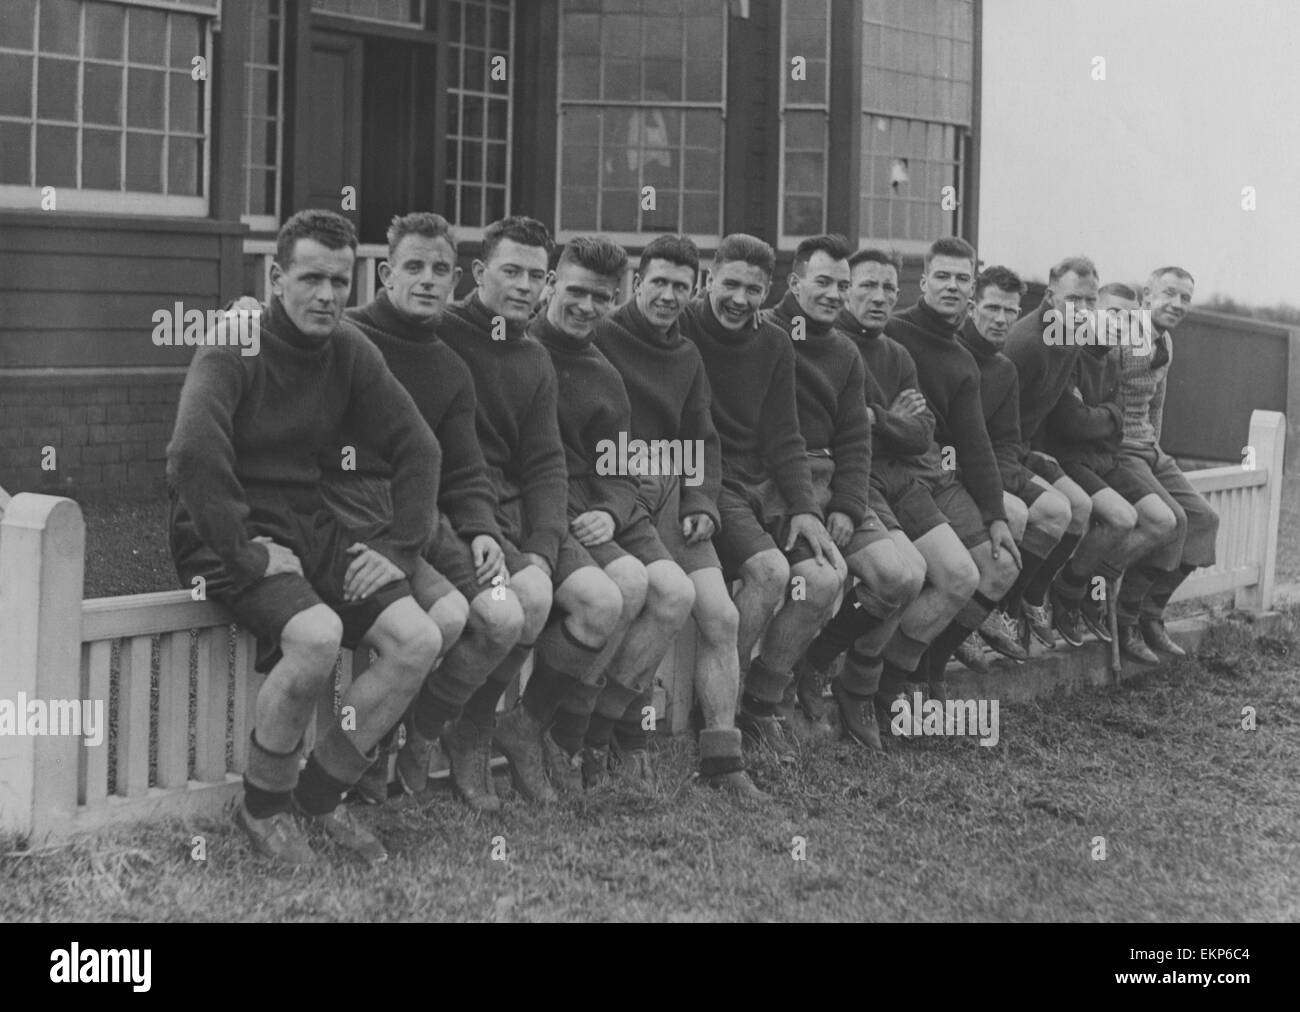 The Sunderland squad relax at their Southport Training camp ahead of the FA Cup Semi final against Birmingham City. Southport was a regular venue for the Sunderland team in the 1930’s when they wanted to get away from the football madness on Wearside! Fro Stock Photo